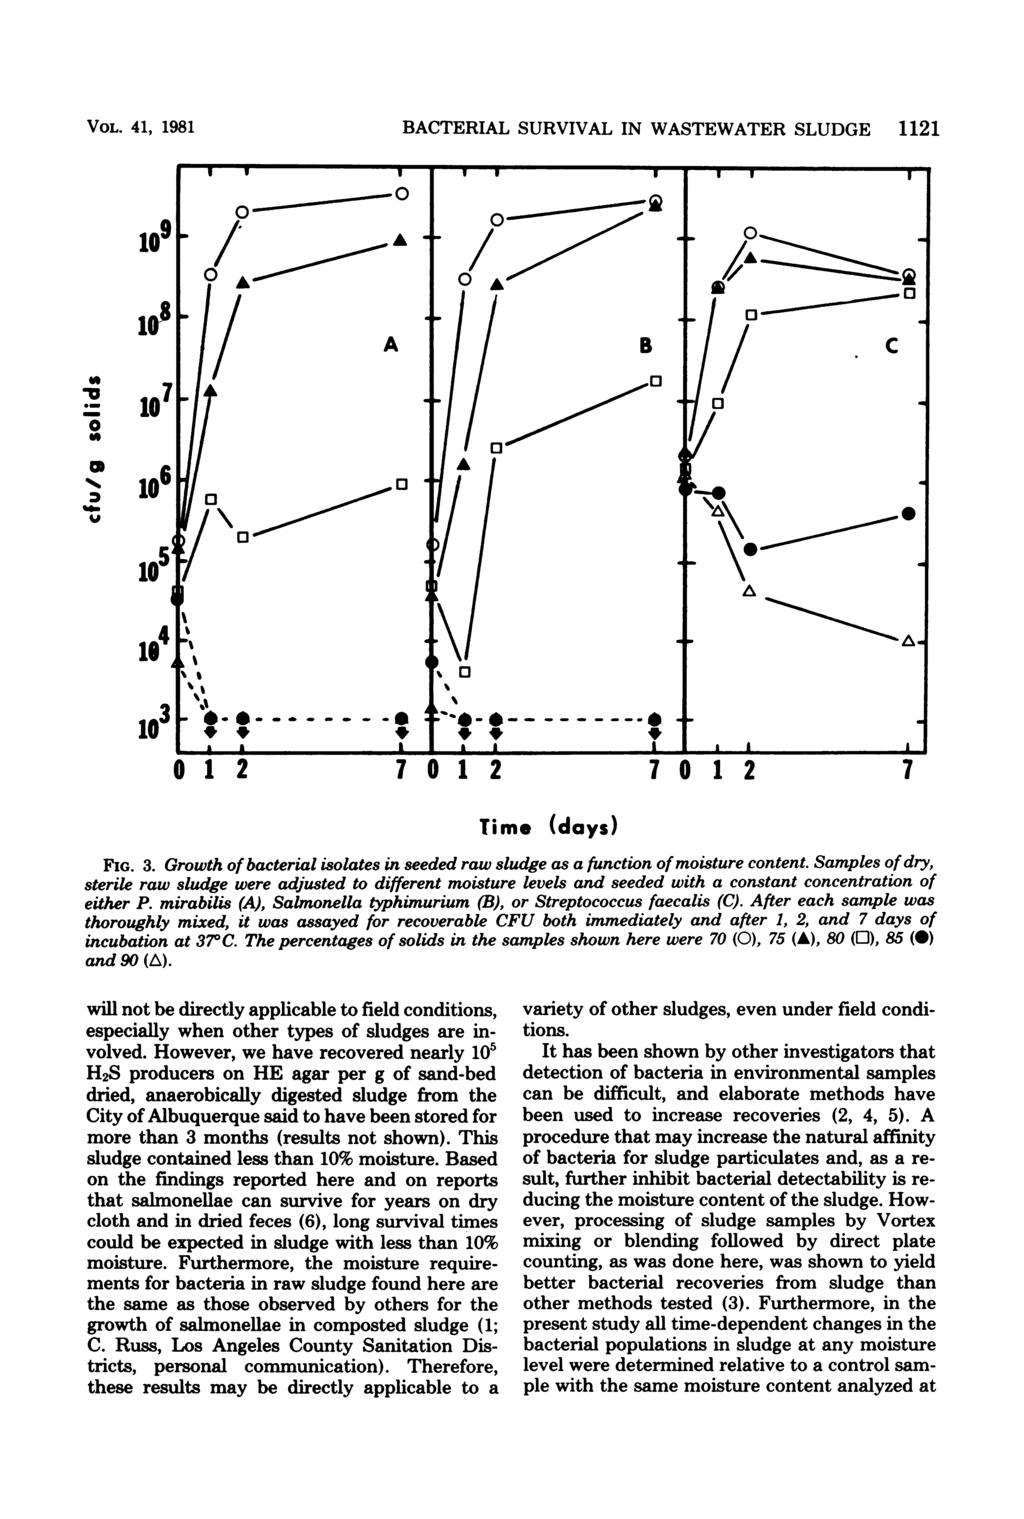 VOL. 41, 1981 BACTERIAL SURVIVAL IN WASTEWATER SLUDGE 1121 0~~~~~~~~ 103/0 A~~~~~ 'I' i60 1270 1270127 4 3 I 012 70 12 10 12 7 Time (days) FIG. 3. Growth of bacterial isolates in seeded raw sludge as a function ofmoisture content.